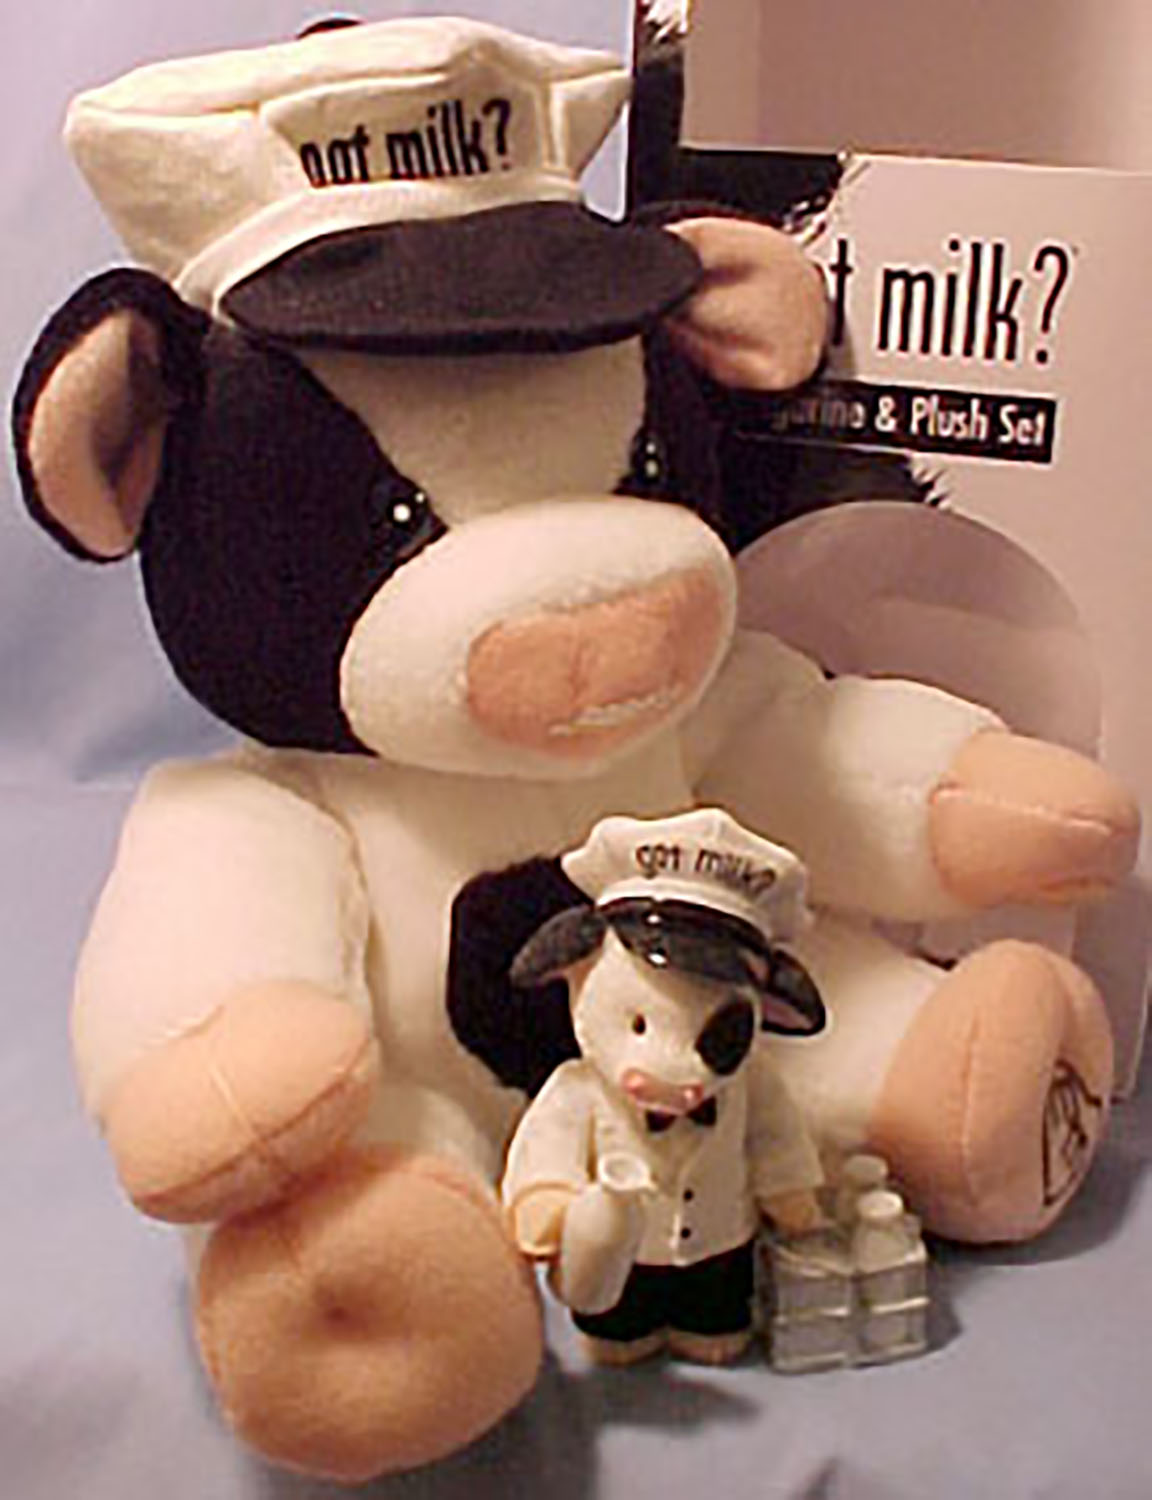 Adorable Mary's Moo Moos Got Milk? Figurines and Plush are cows that are from the Got Milk? promotion. Packaging on these looks like a milk carton and just too cute. 